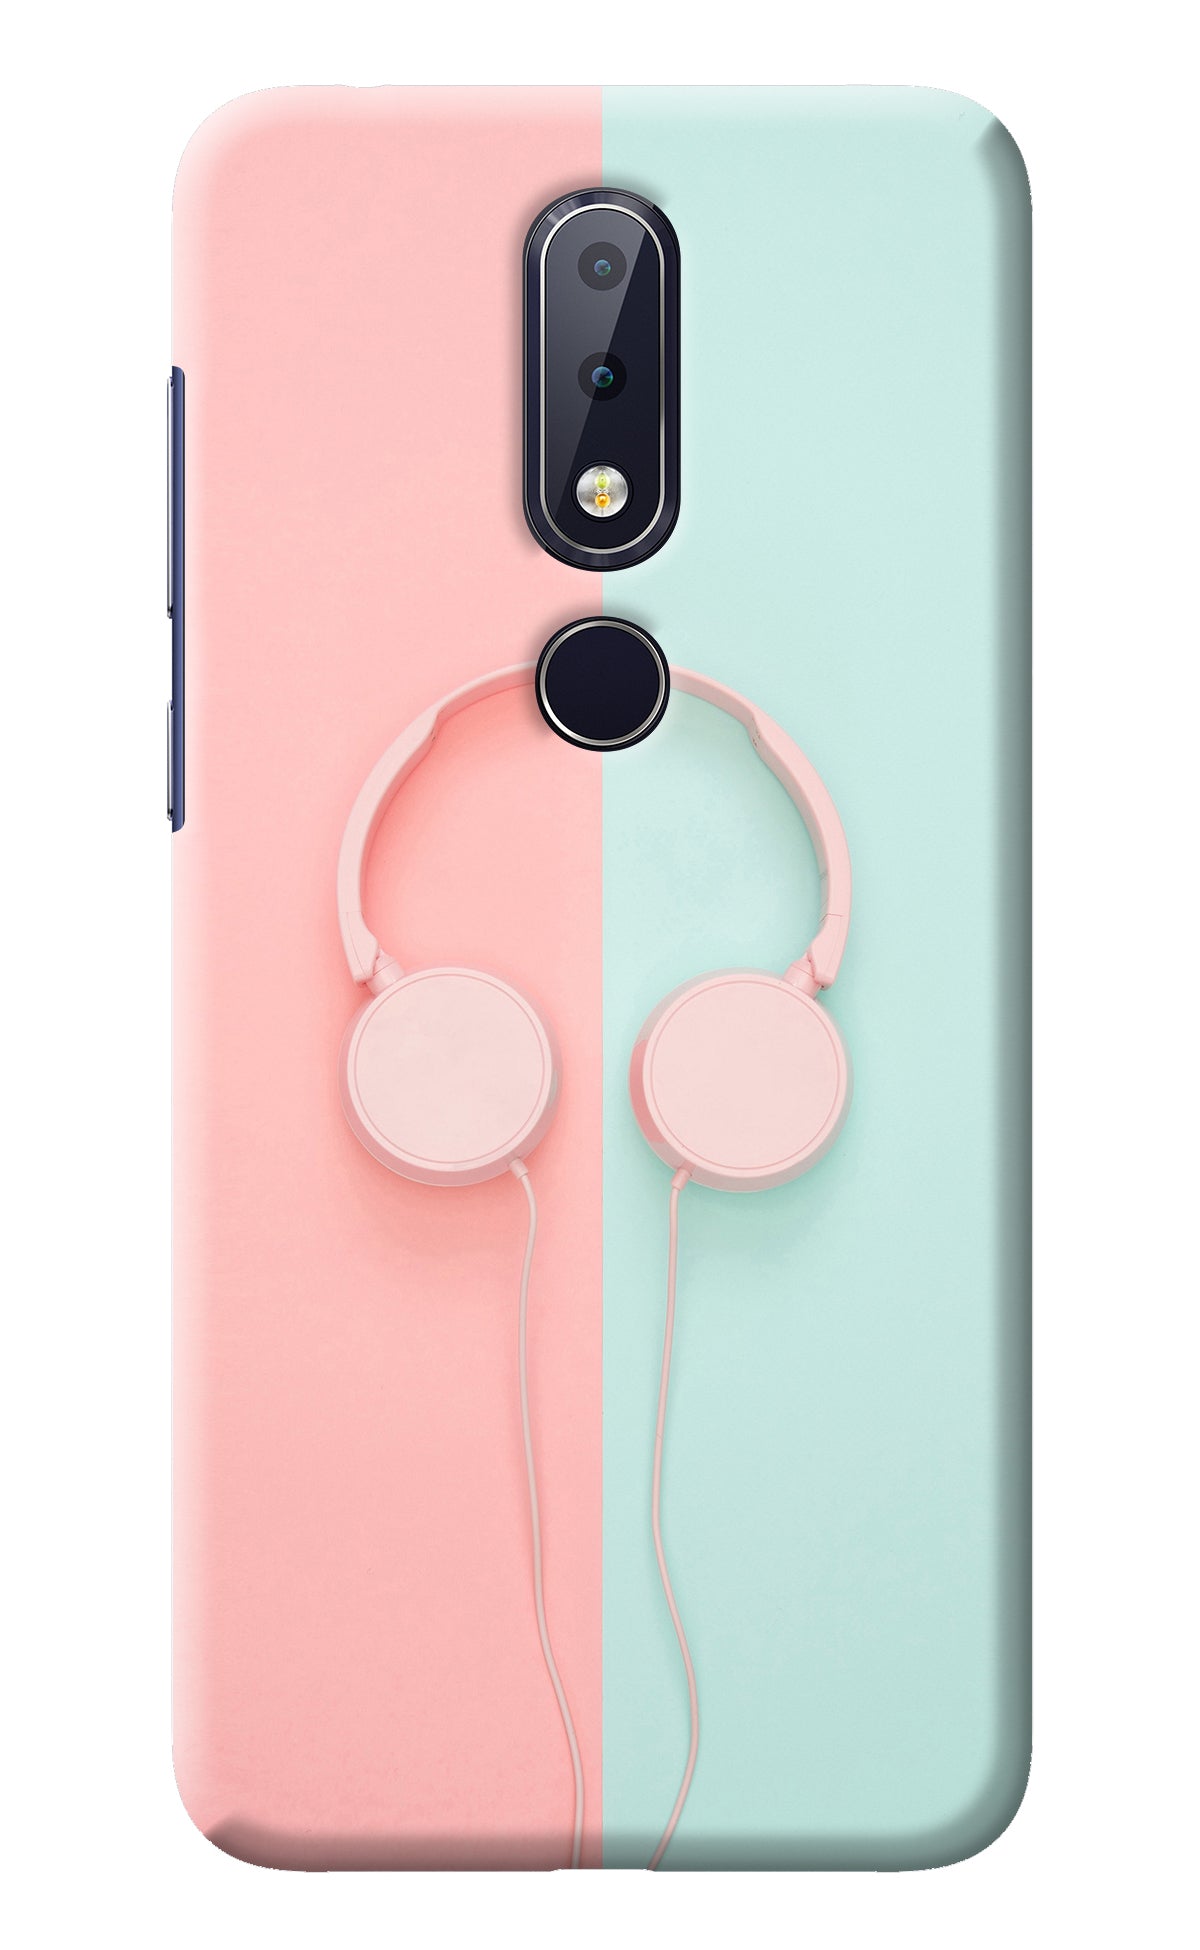 Music Lover Nokia 6.1 plus Back Cover